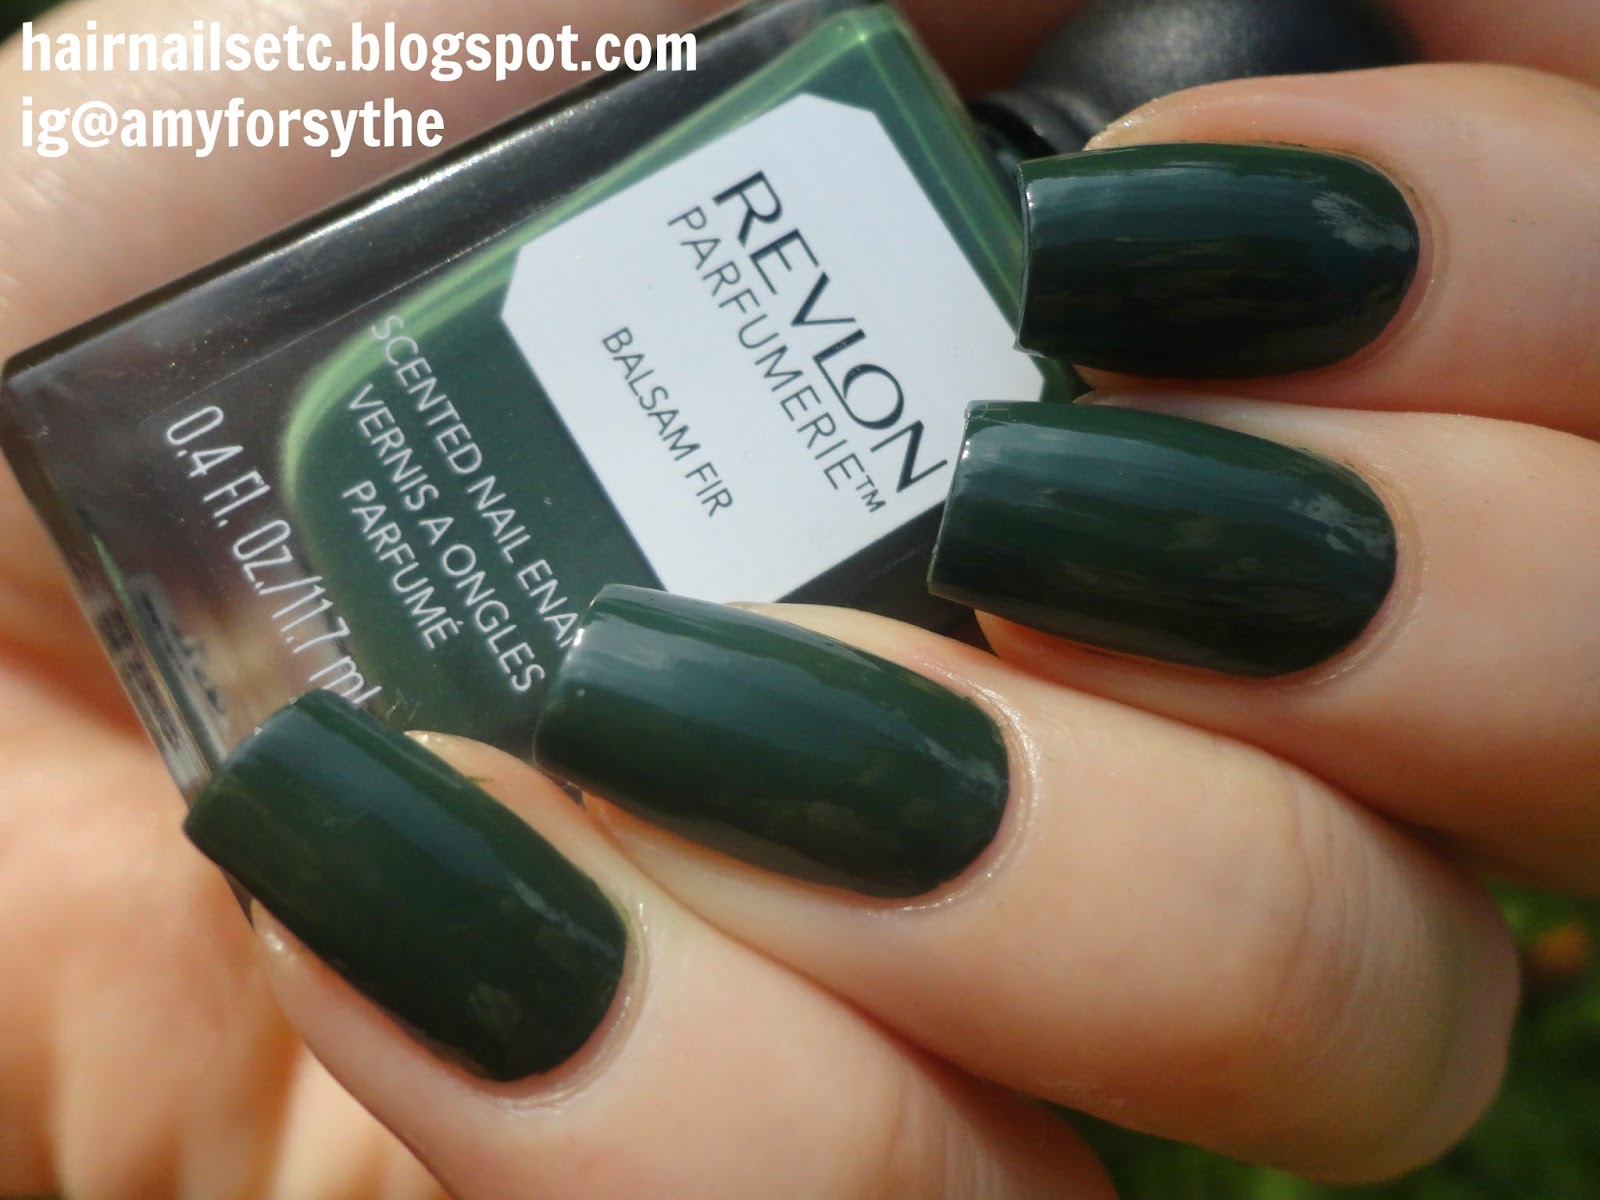 Swatch and review of Revlon Parfumerie Nail Enamel Varnish Polish in Balsam Fir